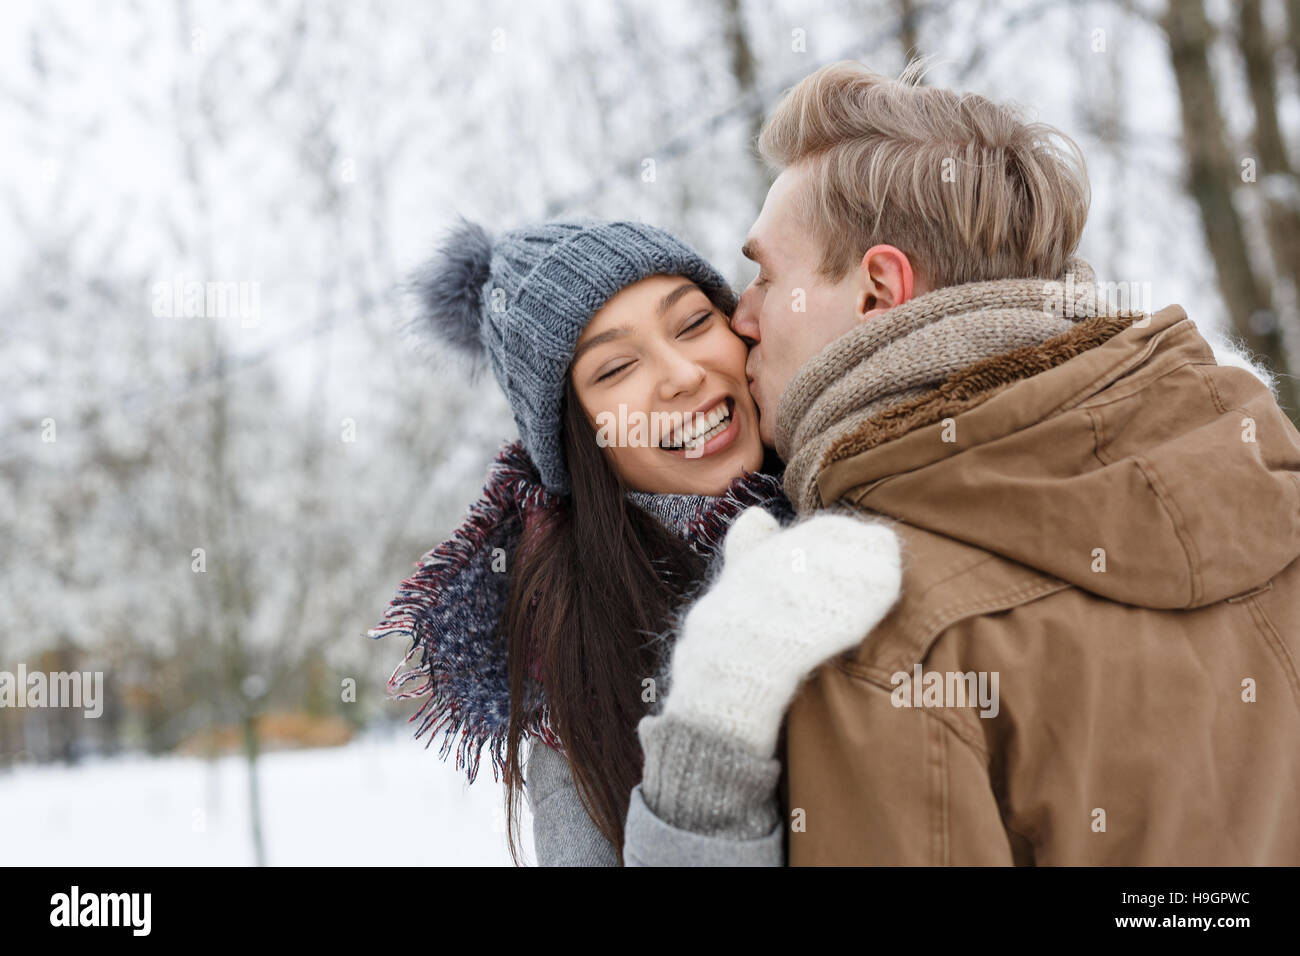 Guy kissing his girlfriend on cheek in embrace Stock Photo